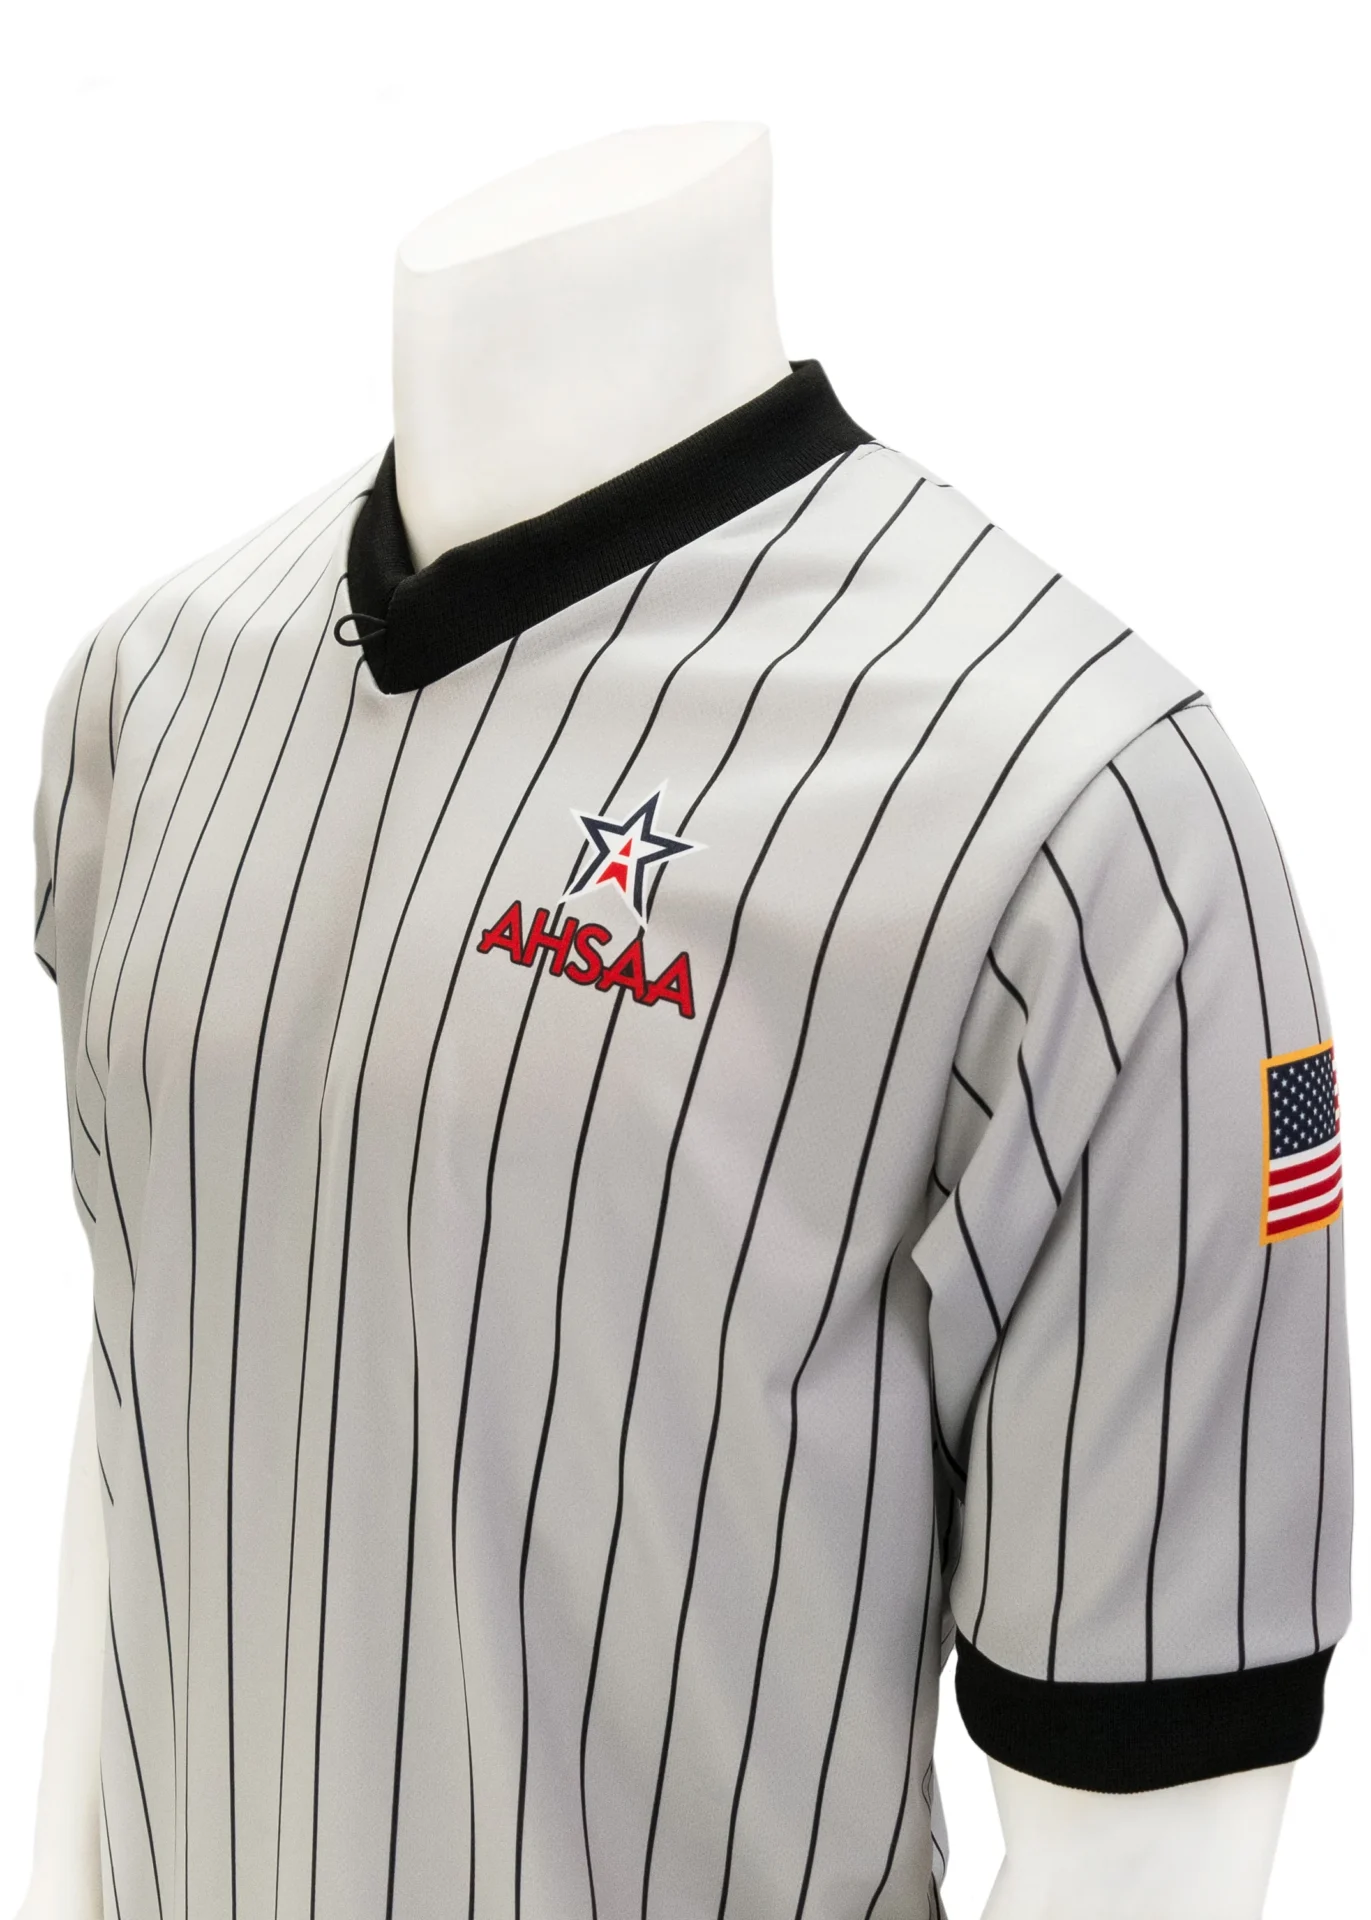 A close up of the chest and collar on an ahsaa baseball uniform.